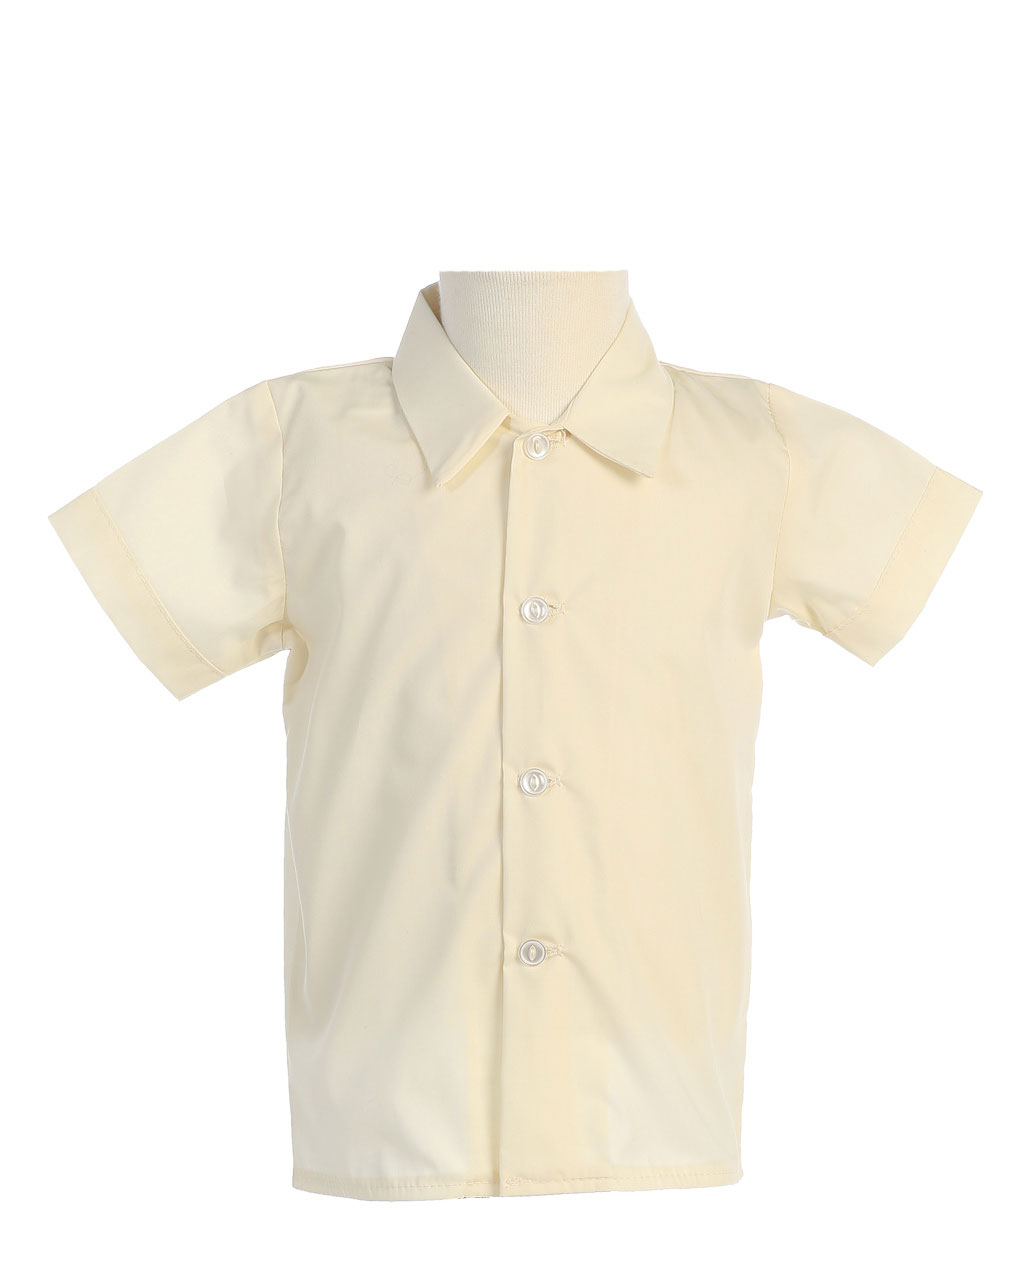 Boys Short Sleeved Simple Dress Shirt - Available in Ivory S